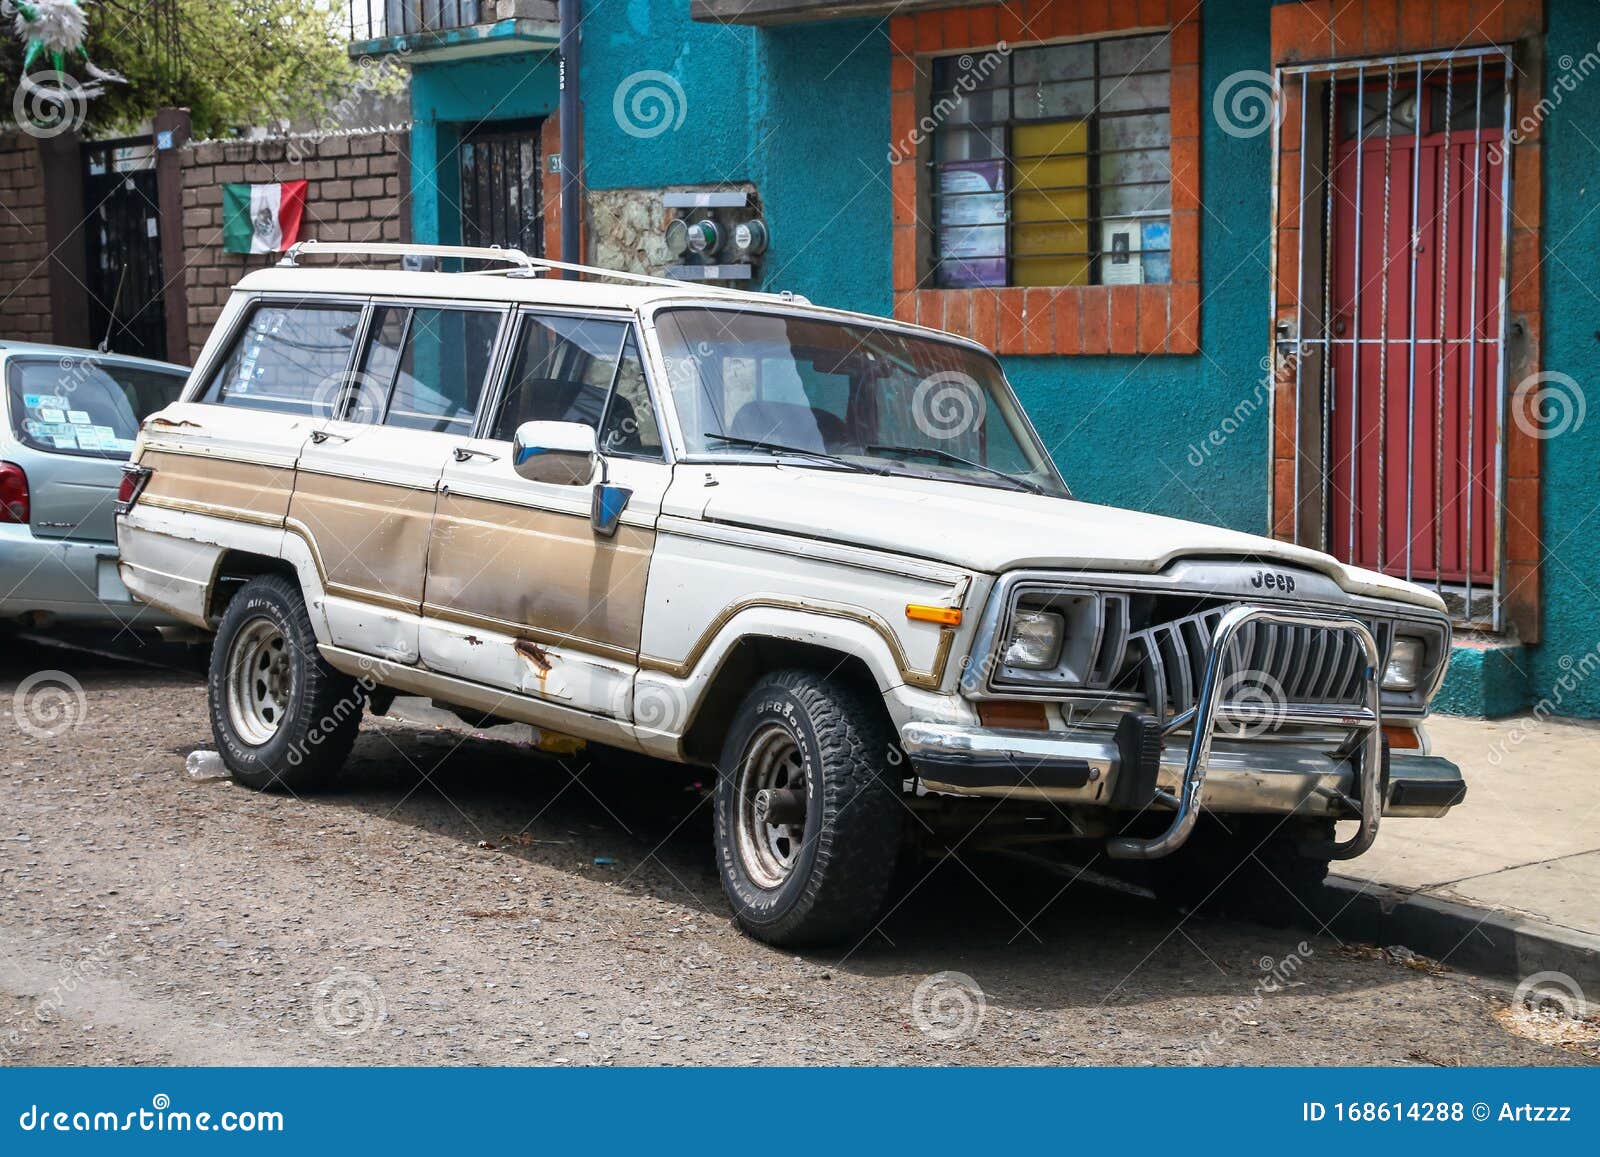 Wagoneer Photos Free Royalty Free Stock Photos From Dreamstime